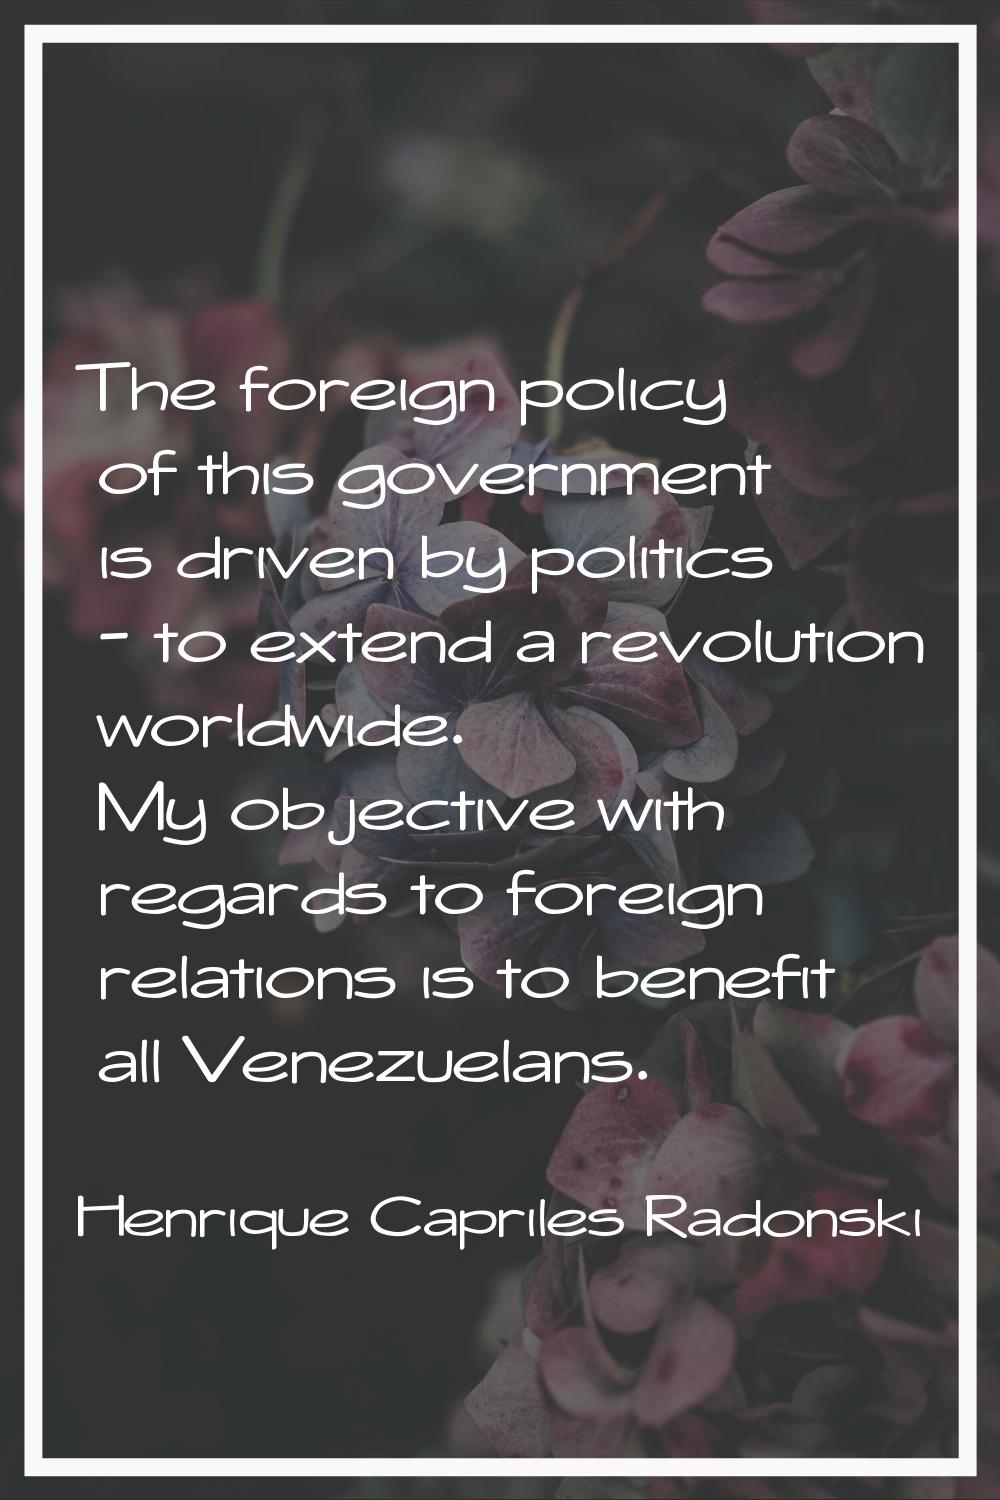 The foreign policy of this government is driven by politics - to extend a revolution worldwide. My 